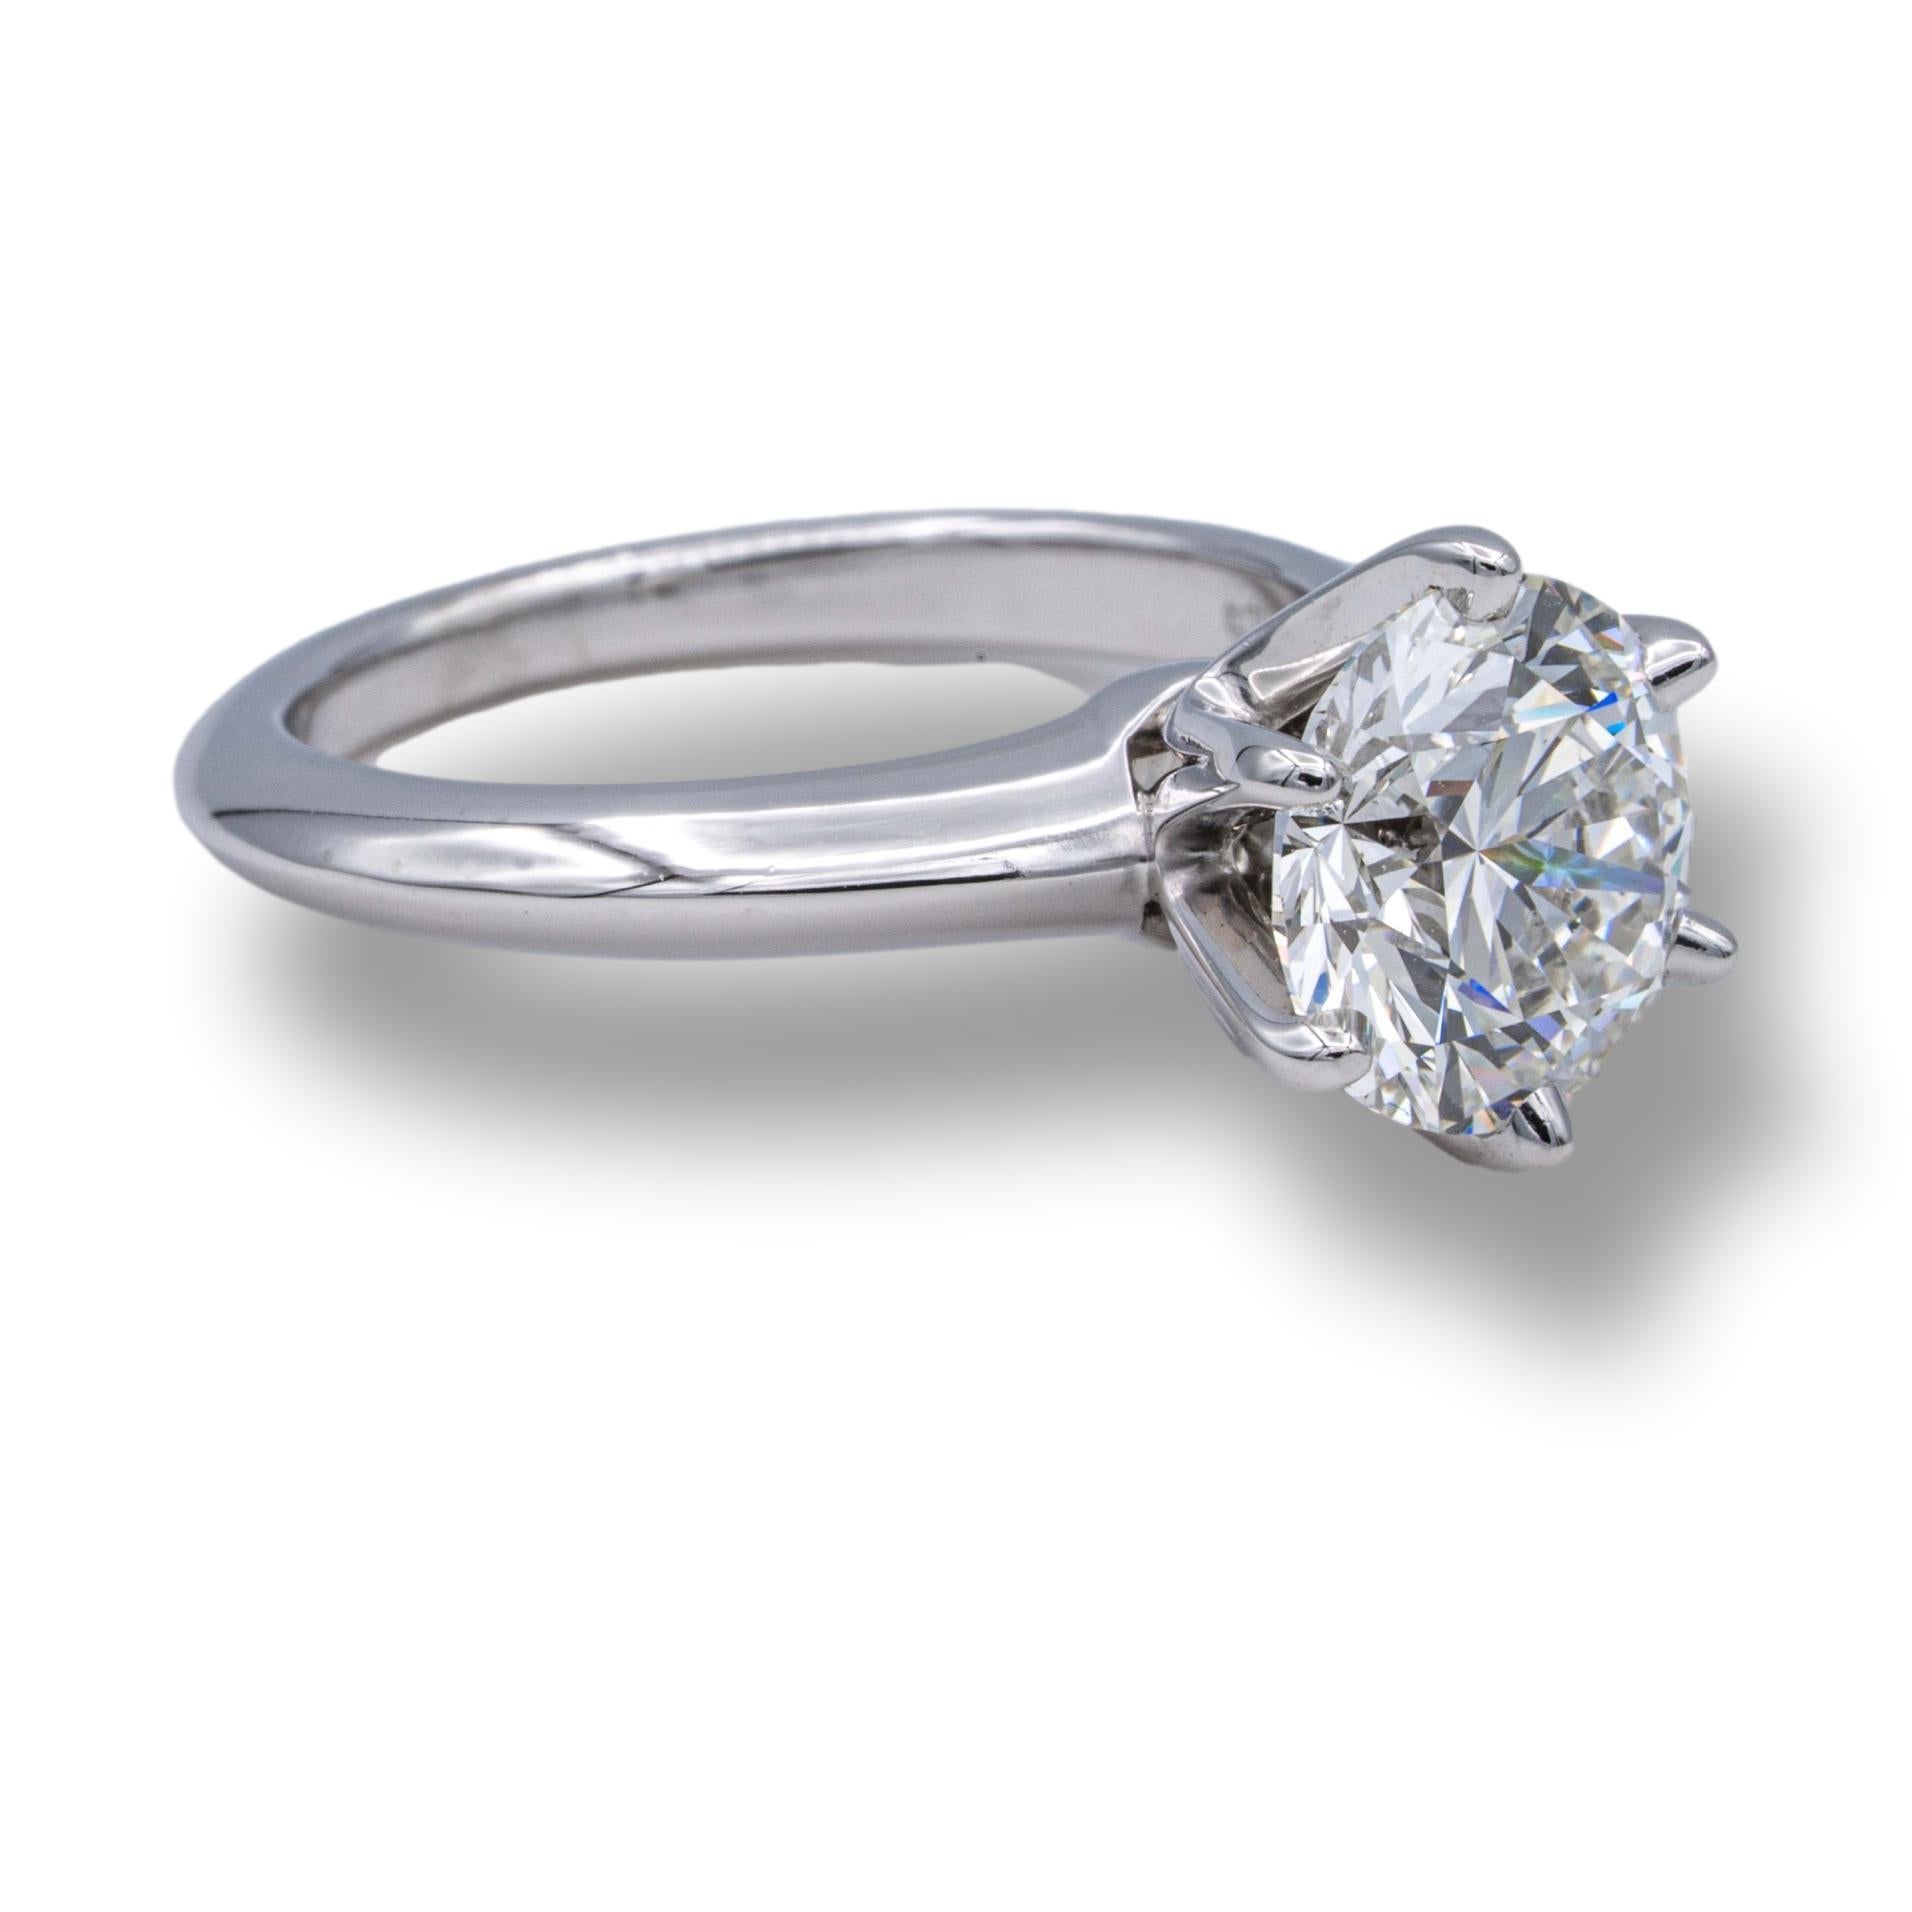 Tiffany & Co Platinum Solitaire Engagement Ring finely crafted in a six prong platinum mounting with one Round brilliant cut diamond center weighing 2.25 cts H color VS1 clarity. Diamond is extremely bright and brilliant. Tiffany's diamond